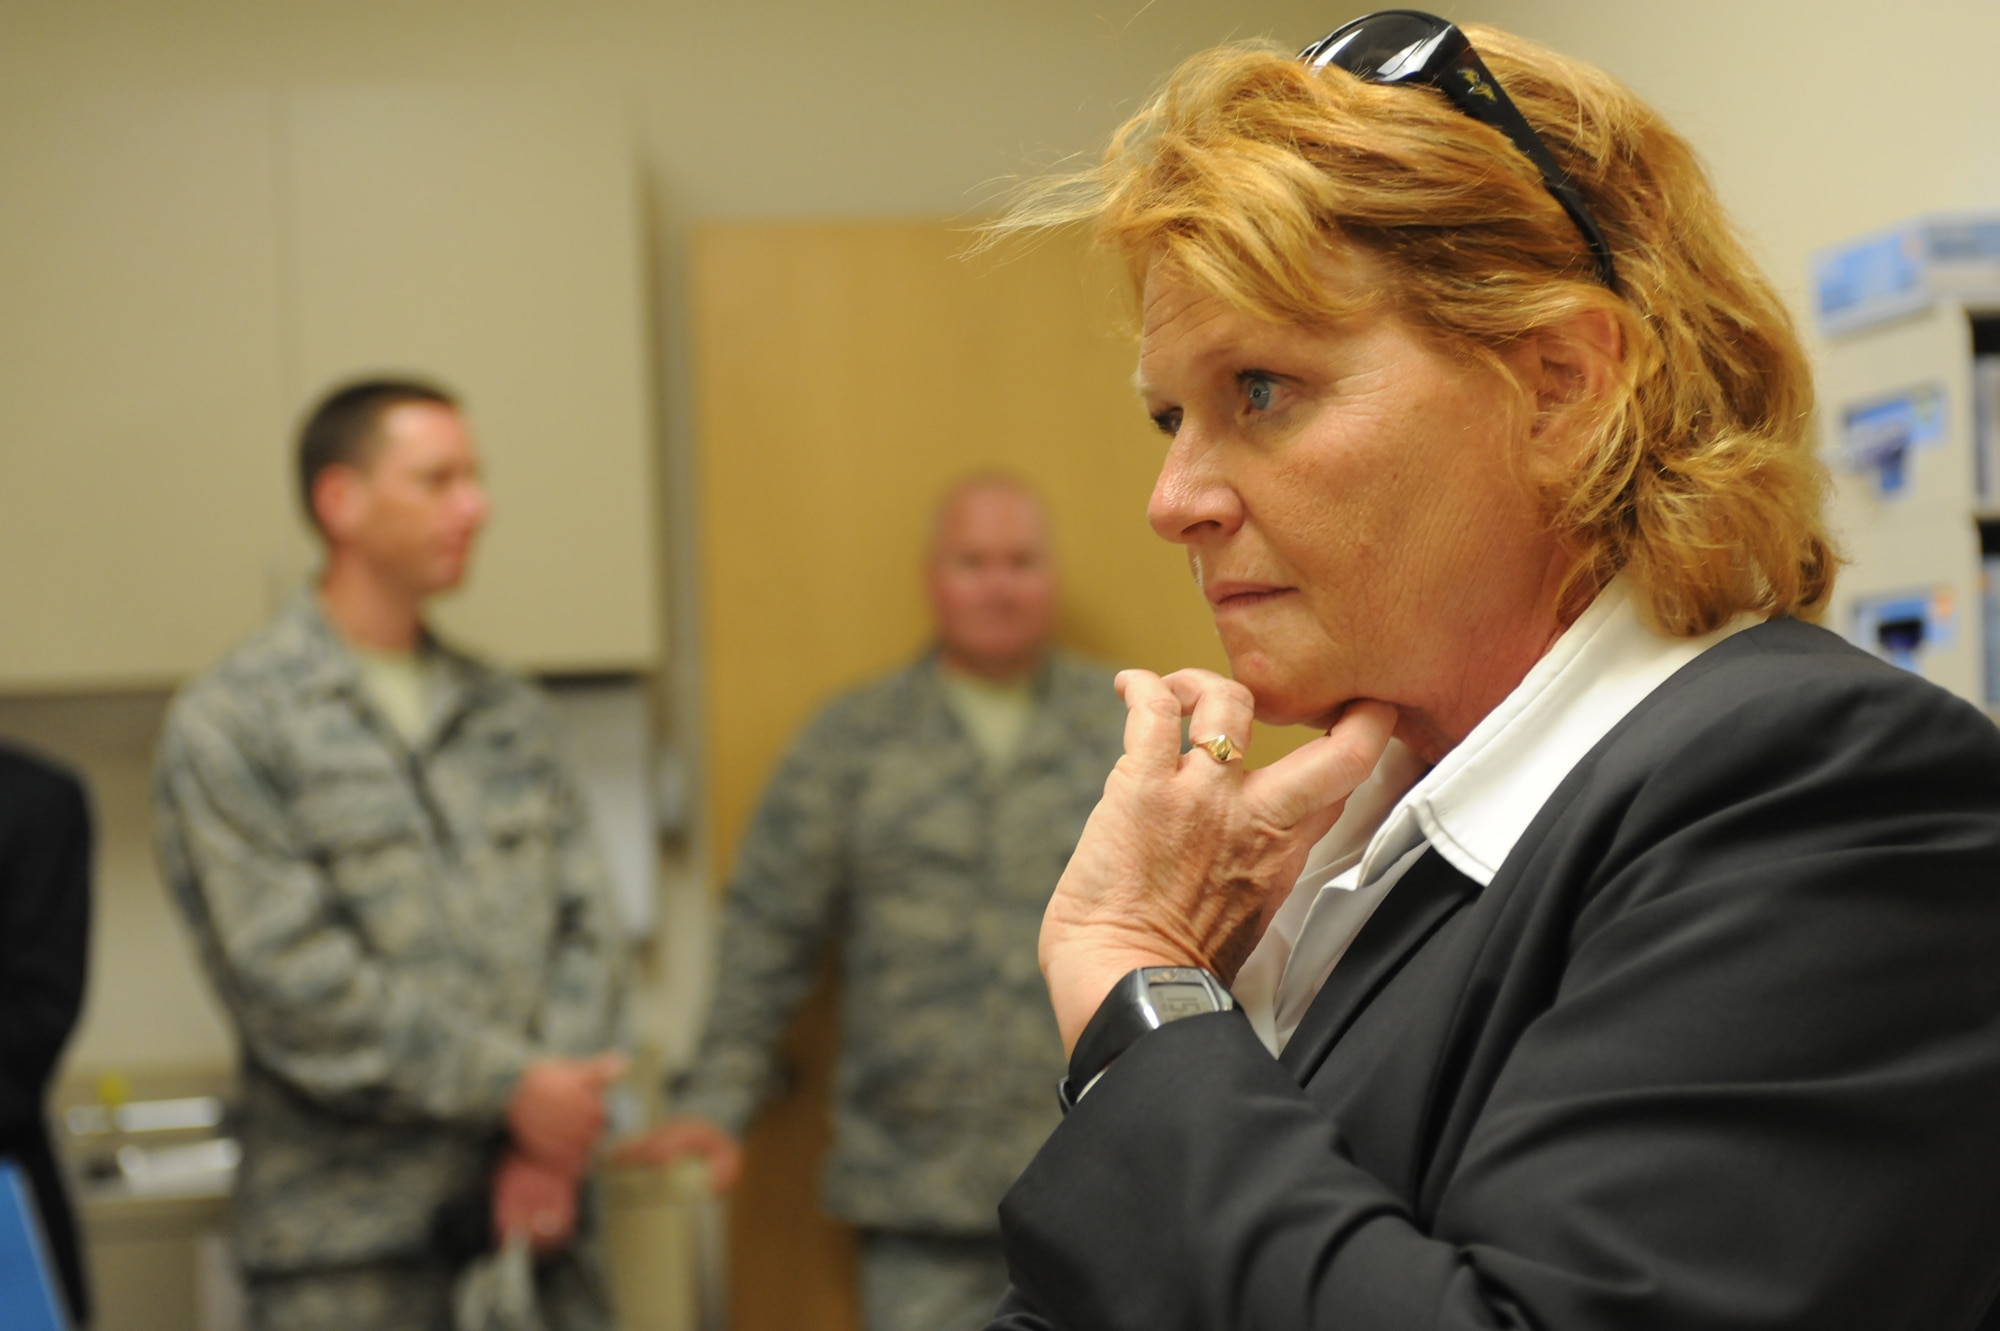 North Dakota Senator Heidi Heitkamp, visits the staff of the Veterans Affairs Clinic, and discusses policies and challenges for the facility at Minot Air Force Base, N.D., June 28. The tour of the base clinic is one of several visits she will be making to veterans facilities across the state to assess the establishments strengths and short comings. While at the base, Heitkamp was able to meet veterans and their families face to face and learn firsthand about the care and assistance that they are able to receive at the base VA clinic. (U.S. Air Force photo/Airman 1st Class Stephanie Ashley)